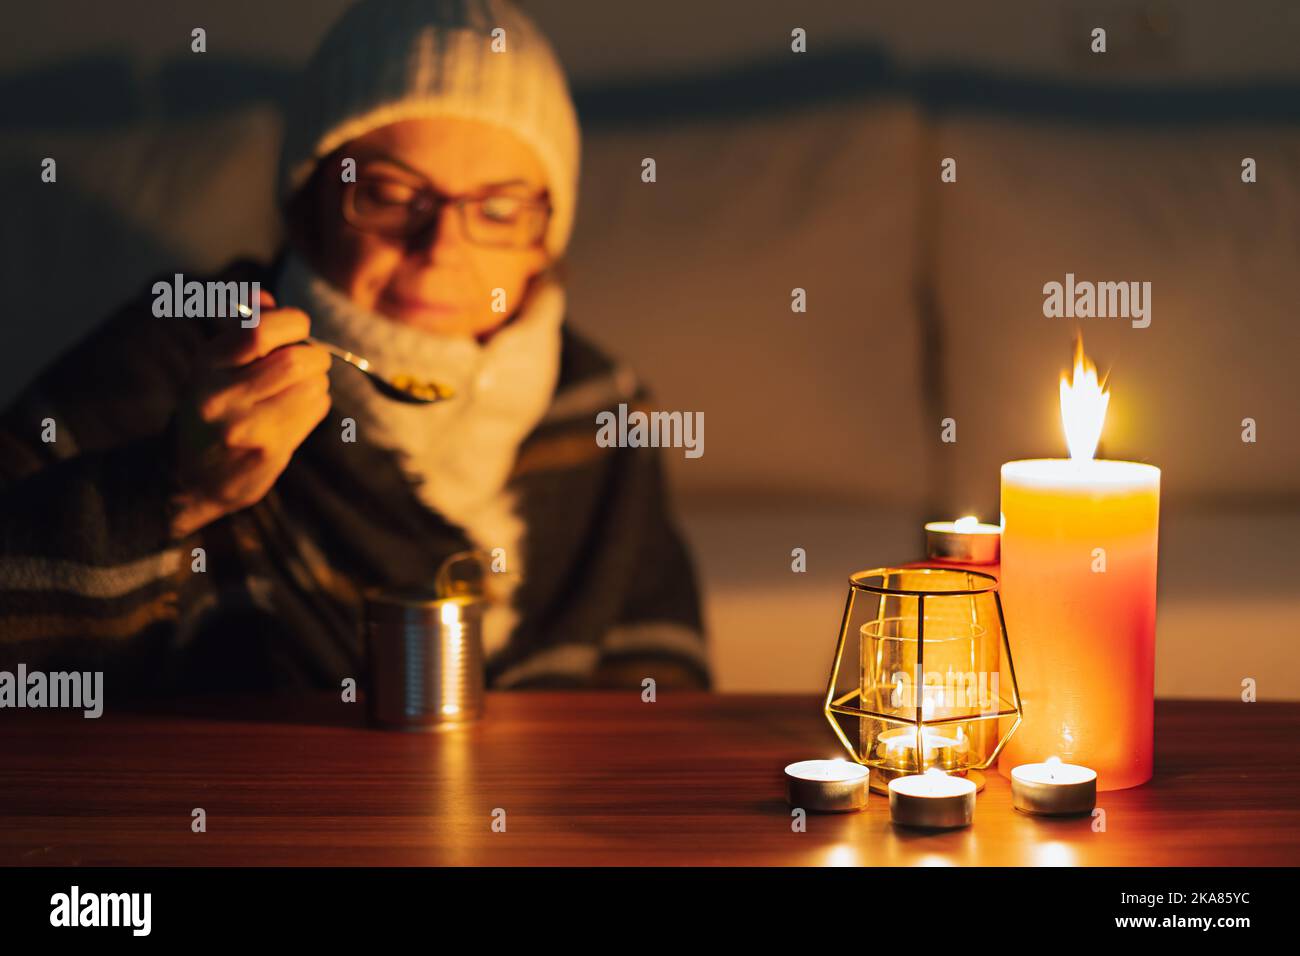 https://c8.alamy.com/comp/2KA85YC/woman-eating-canned-food-by-candlelight-electricity-and-gas-outages-in-winter-power-cut-2KA85YC.jpg